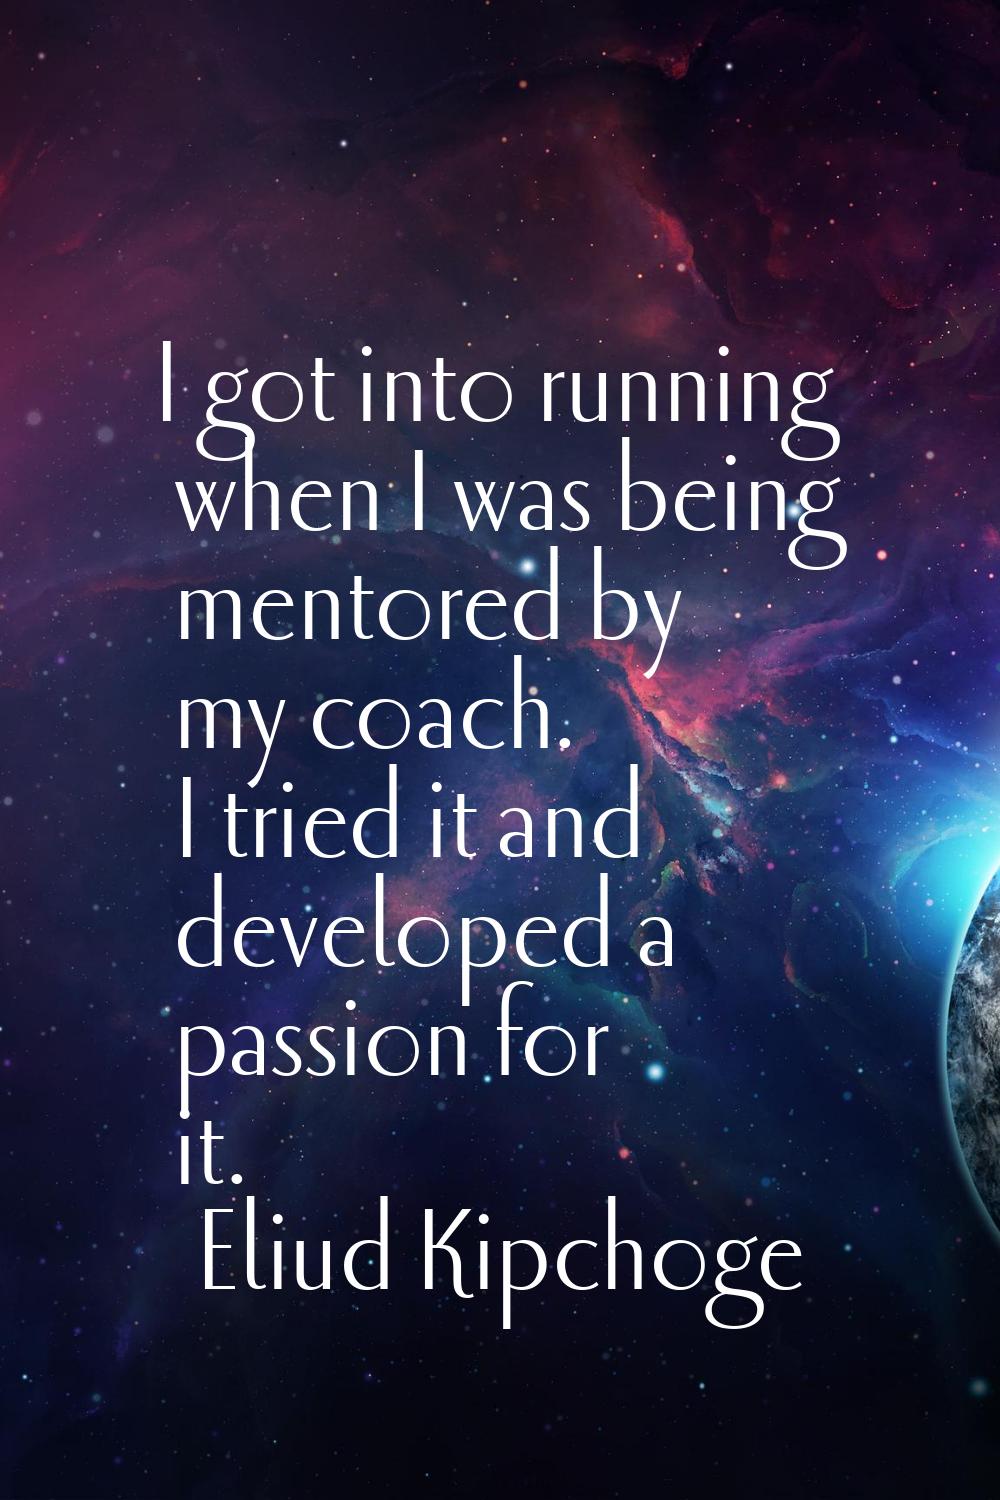 I got into running when I was being mentored by my coach. I tried it and developed a passion for it